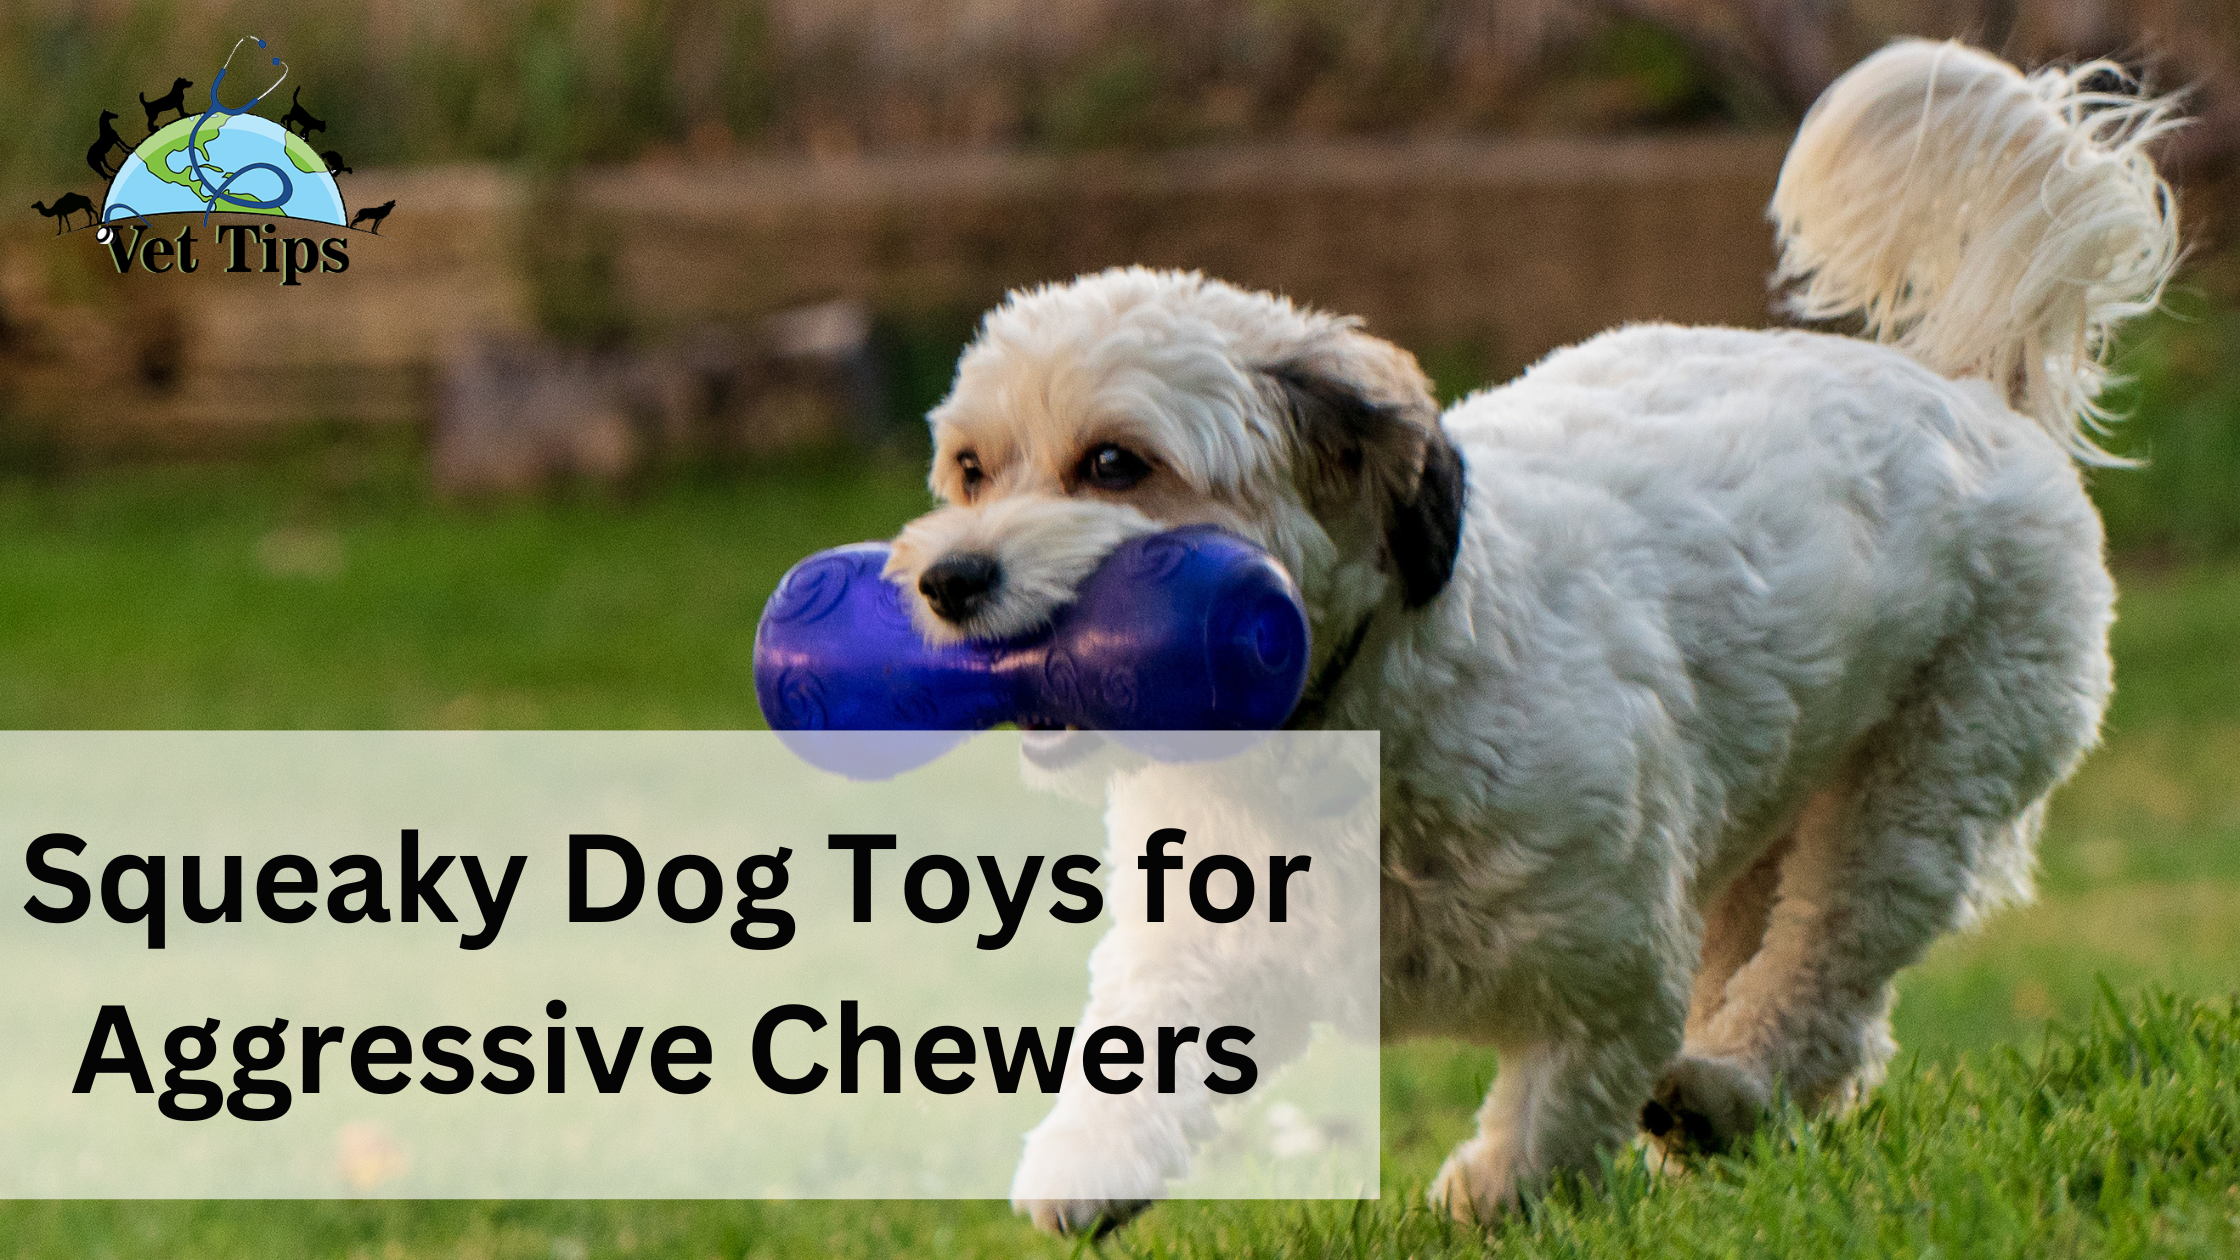 Squeaky Dog Toys for Aggressive Chewers